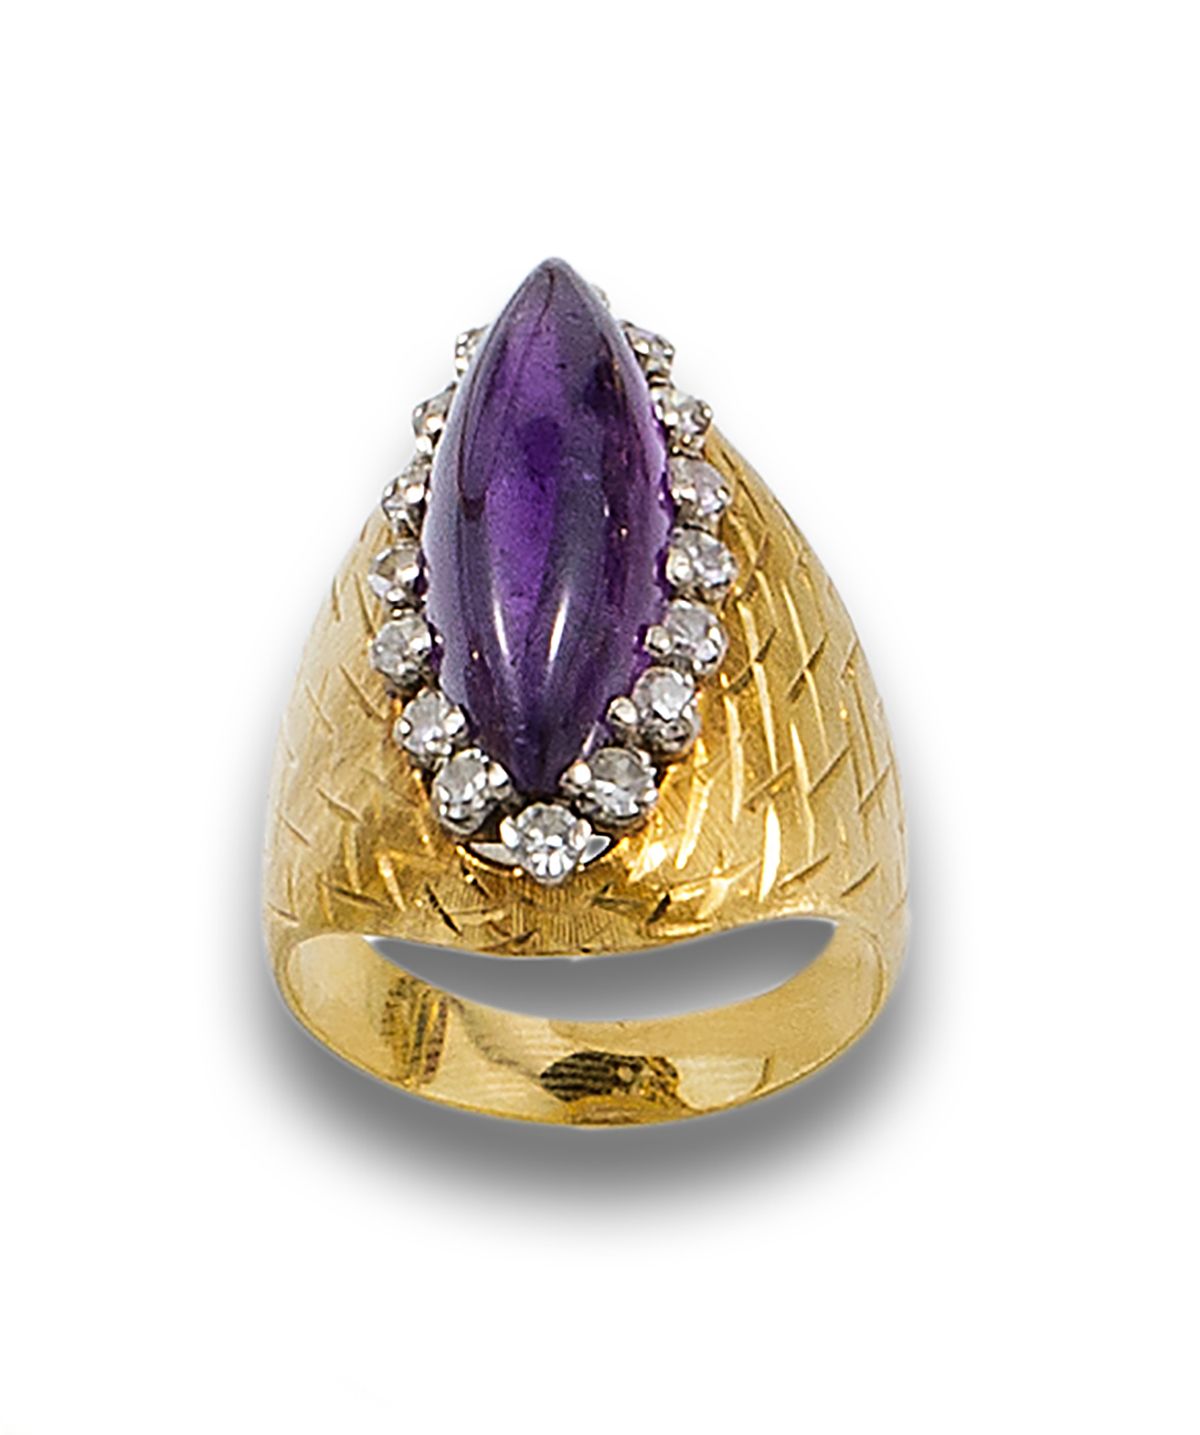 Ring, 1970s, 18 kt yellow and white gold, center with amethyst, cabochon cut and&hellip;